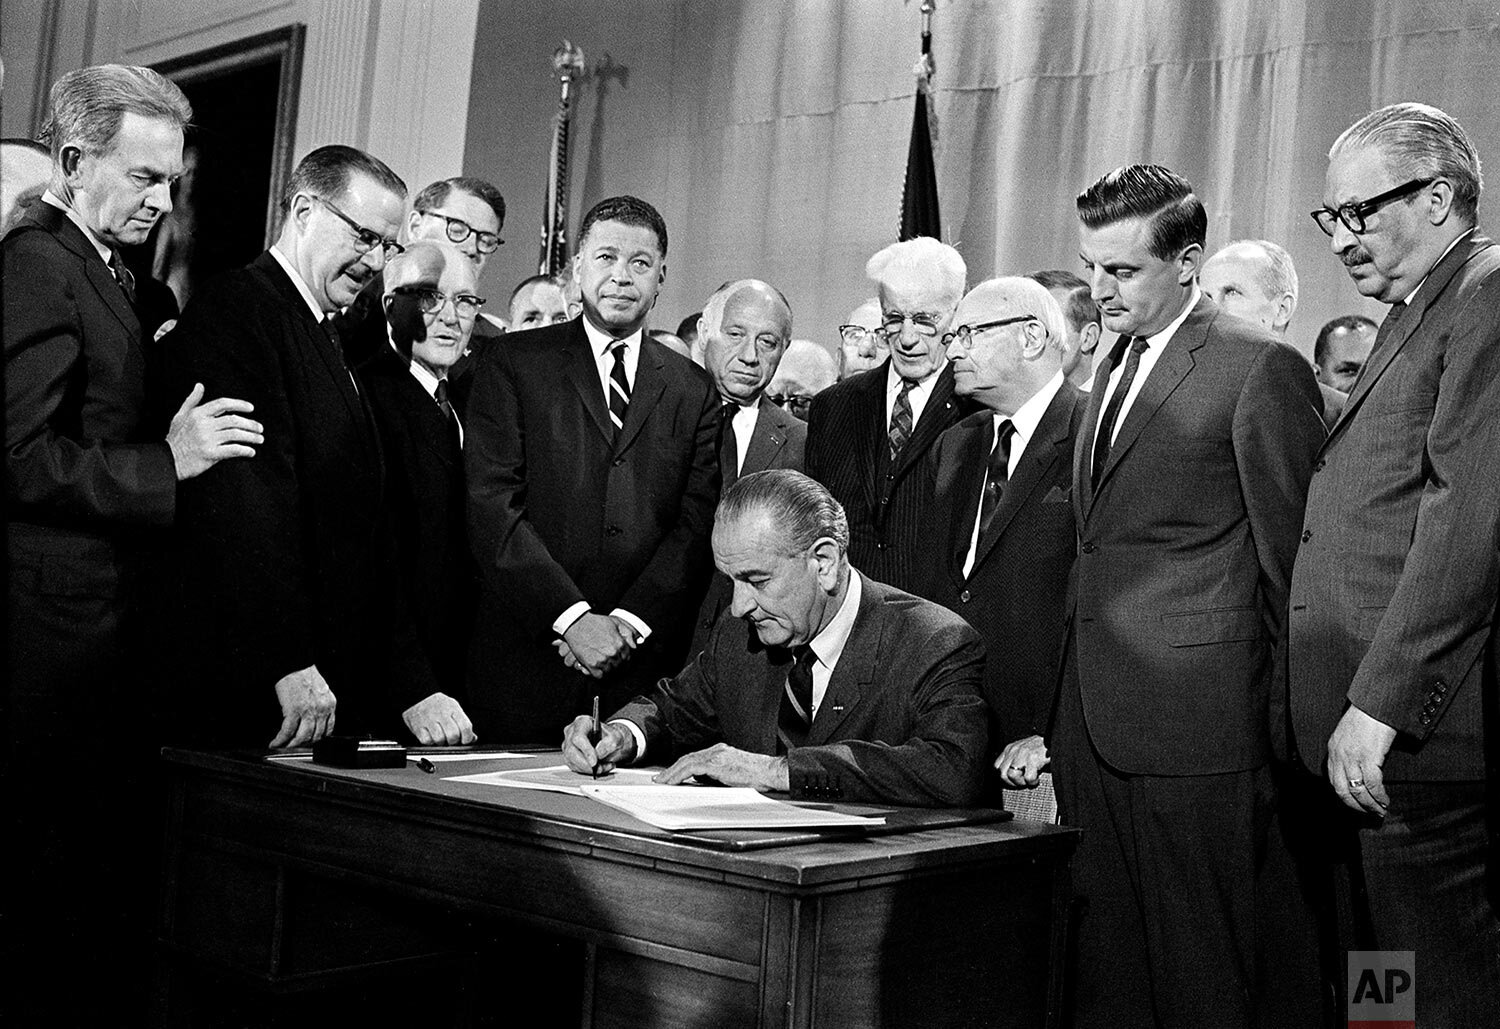  U.S. President Lyndon B. Johnson signs into law the Civil Rights Open Housing bill during a ceremony in the East Room of the White House in Washington, D.C., April 11, 1968.  Watching in the front row, from left, are, Sen. Clifford Case, R-N.J.; Sen